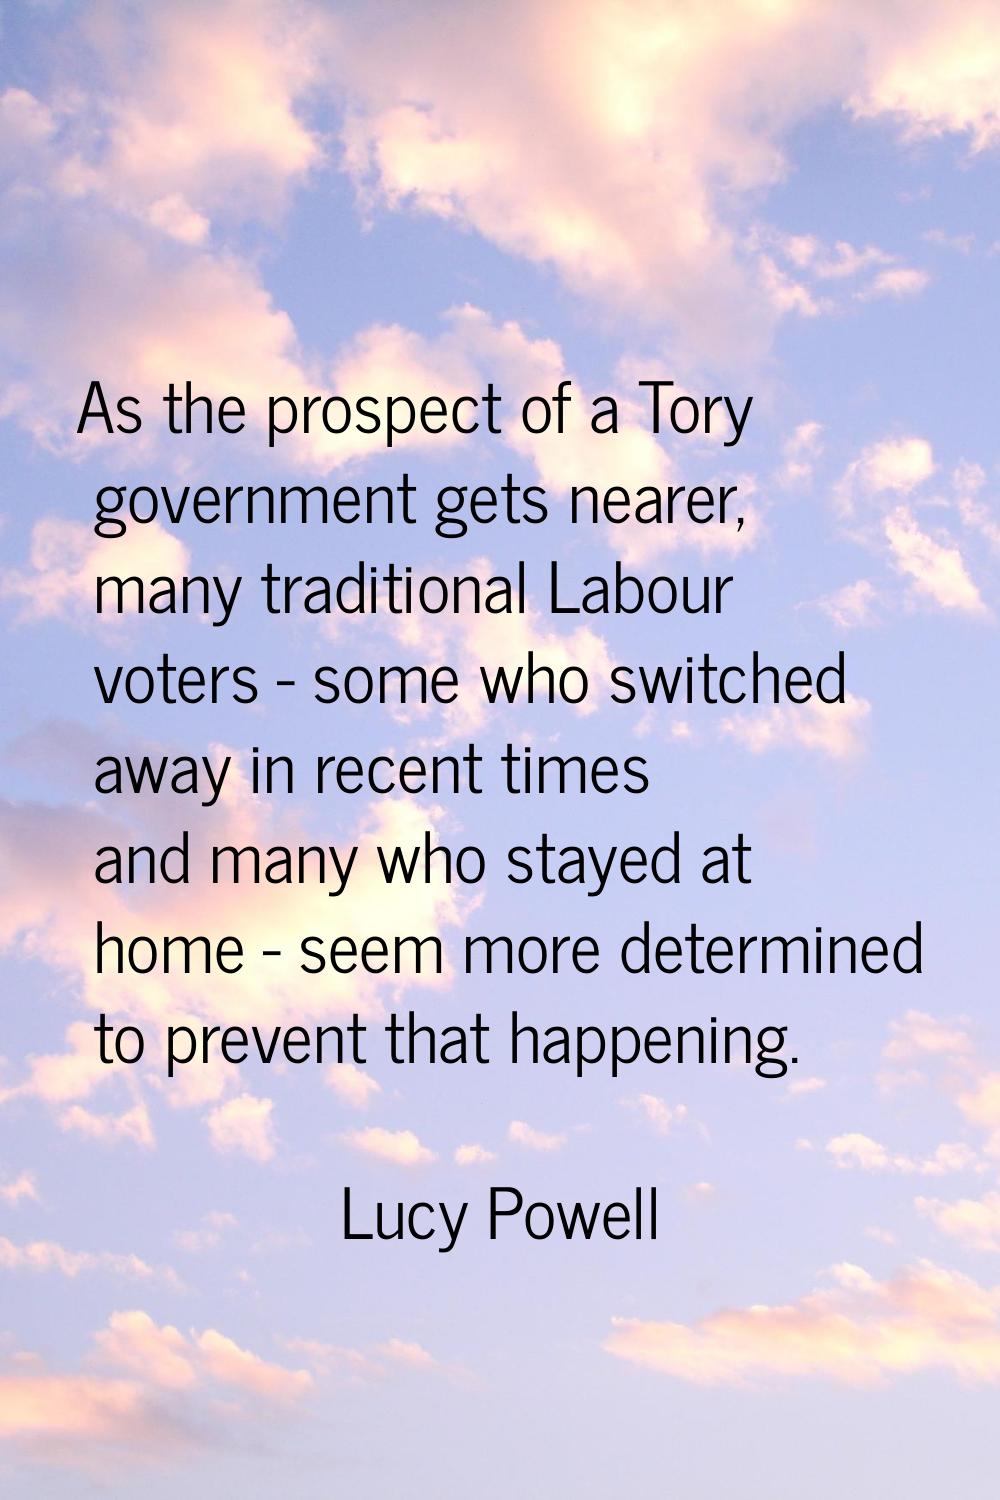 As the prospect of a Tory government gets nearer, many traditional Labour voters - some who switche